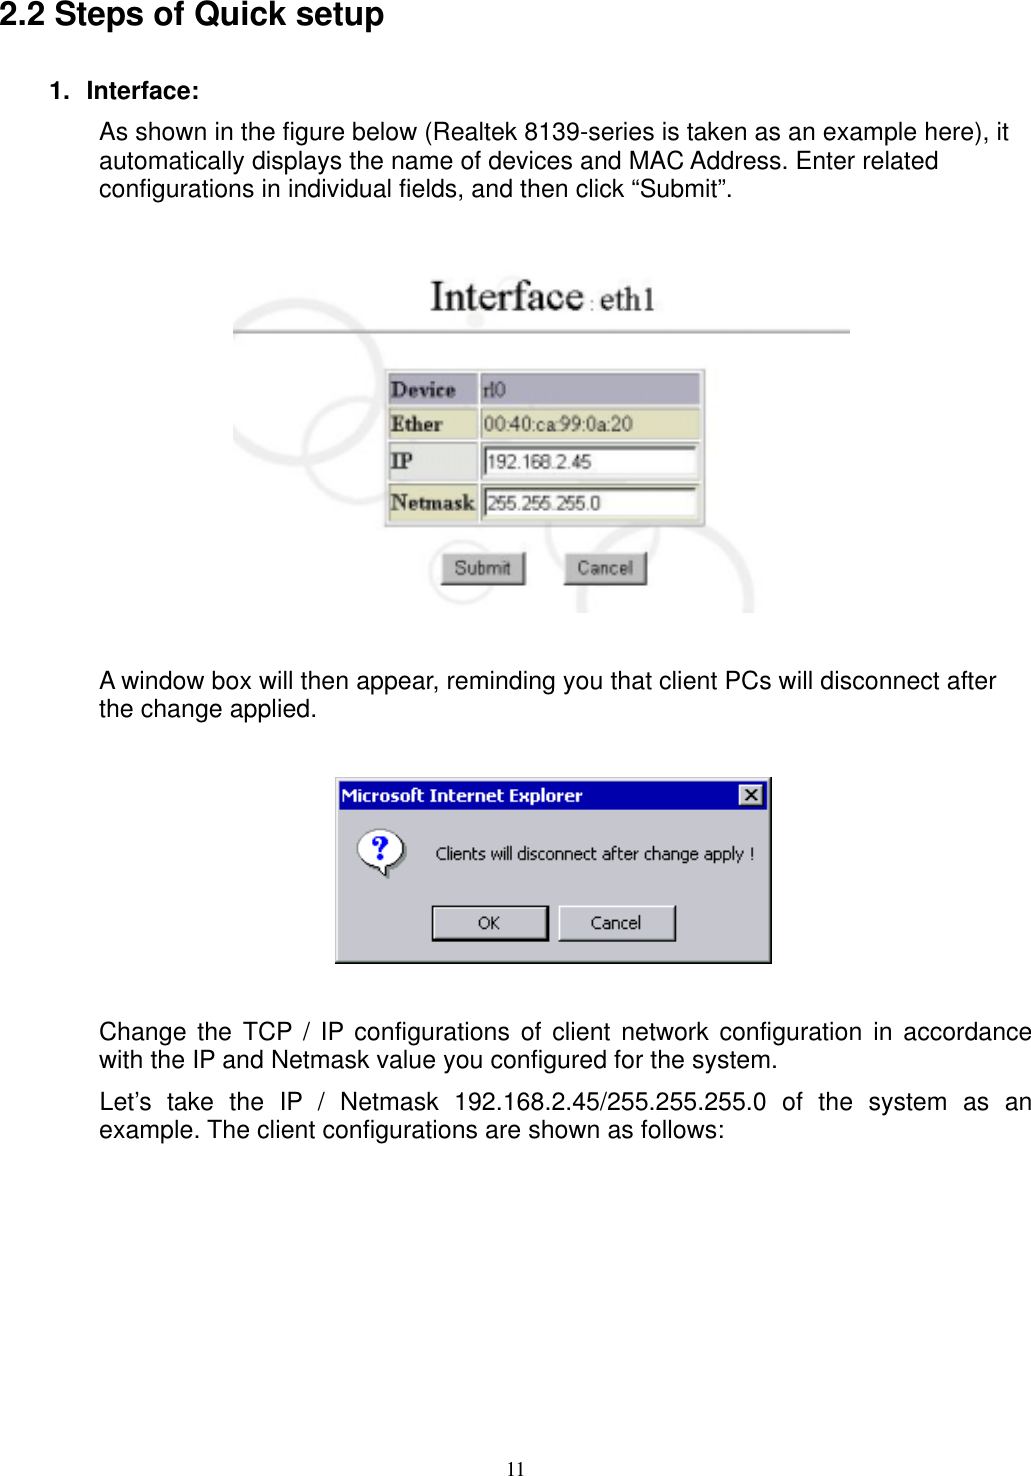  11 2.2 Steps of Quick setup   1. Interface: As shown in the figure below (Realtek 8139-series is taken as an example here), it automatically displays the name of devices and MAC Address. Enter related configurations in individual fields, and then click “Submit”.      A window box will then appear, reminding you that client PCs will disconnect after the change applied.      Change the TCP / IP configurations of client network configuration in accordance with the IP and Netmask value you configured for the system. Let’s take the IP / Netmask 192.168.2.45/255.255.255.0 of the system as an example. The client configurations are shown as follows:  